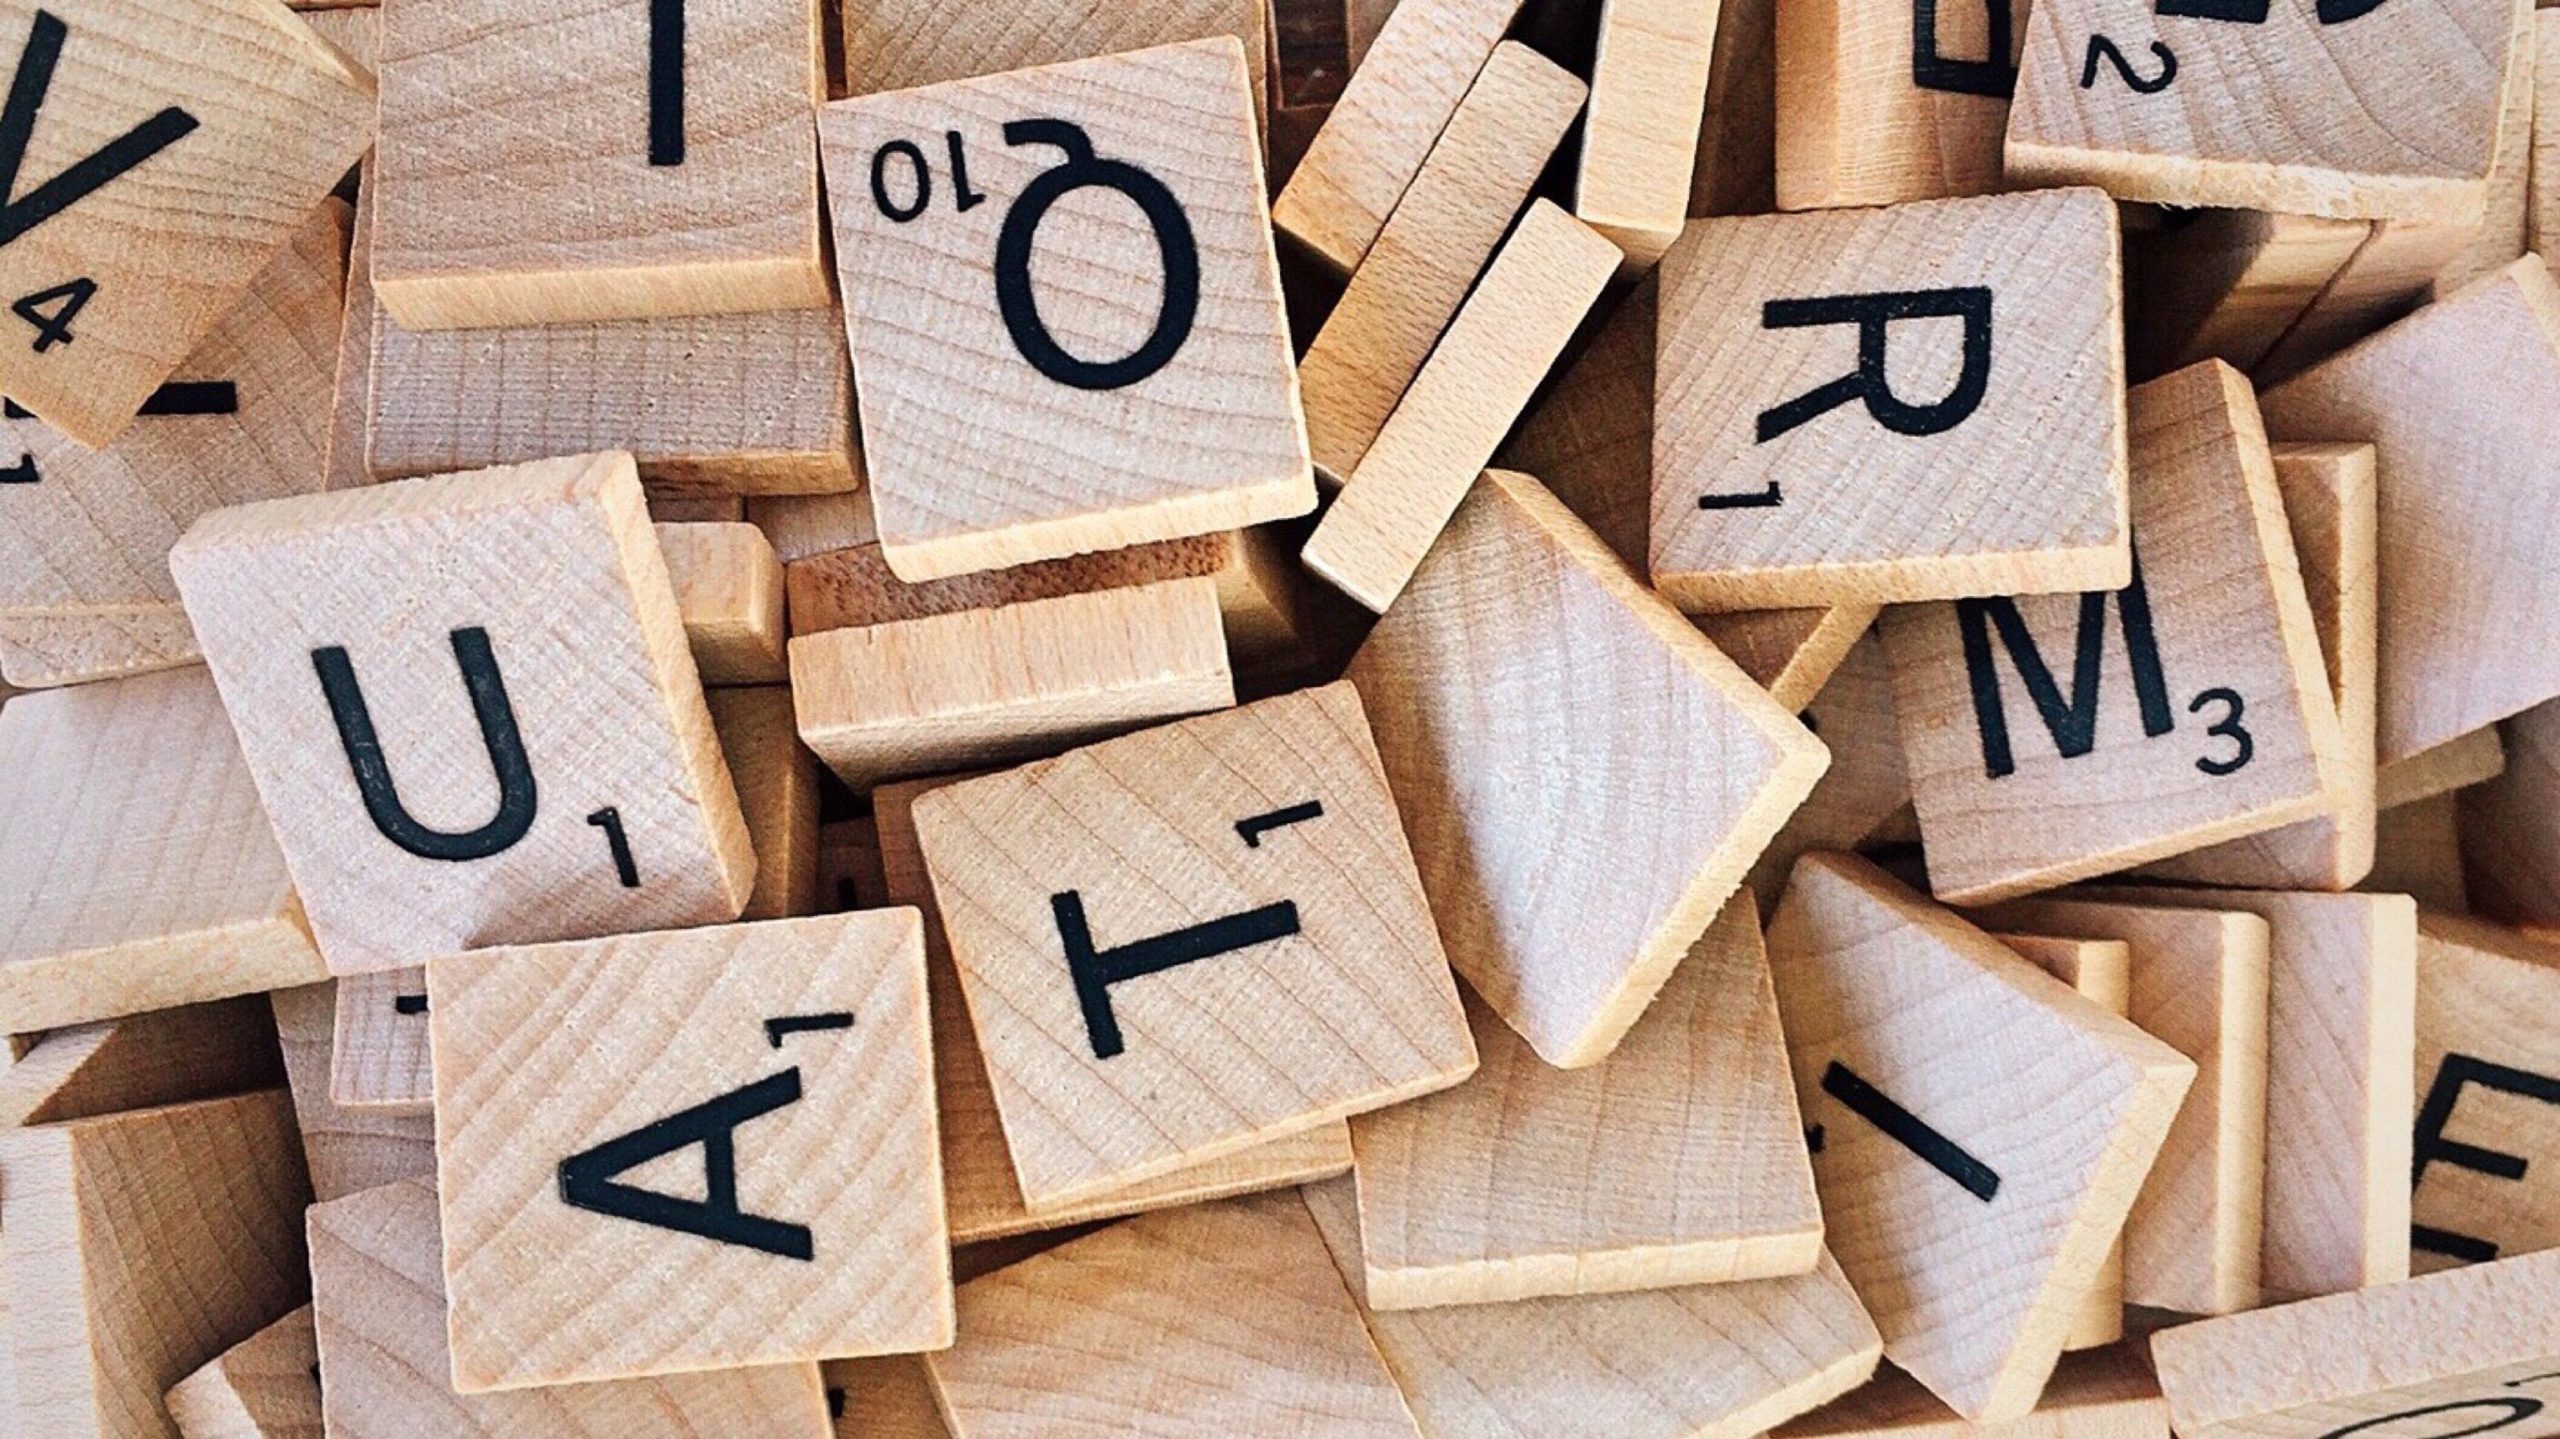 Various scrabble pieces in a pile